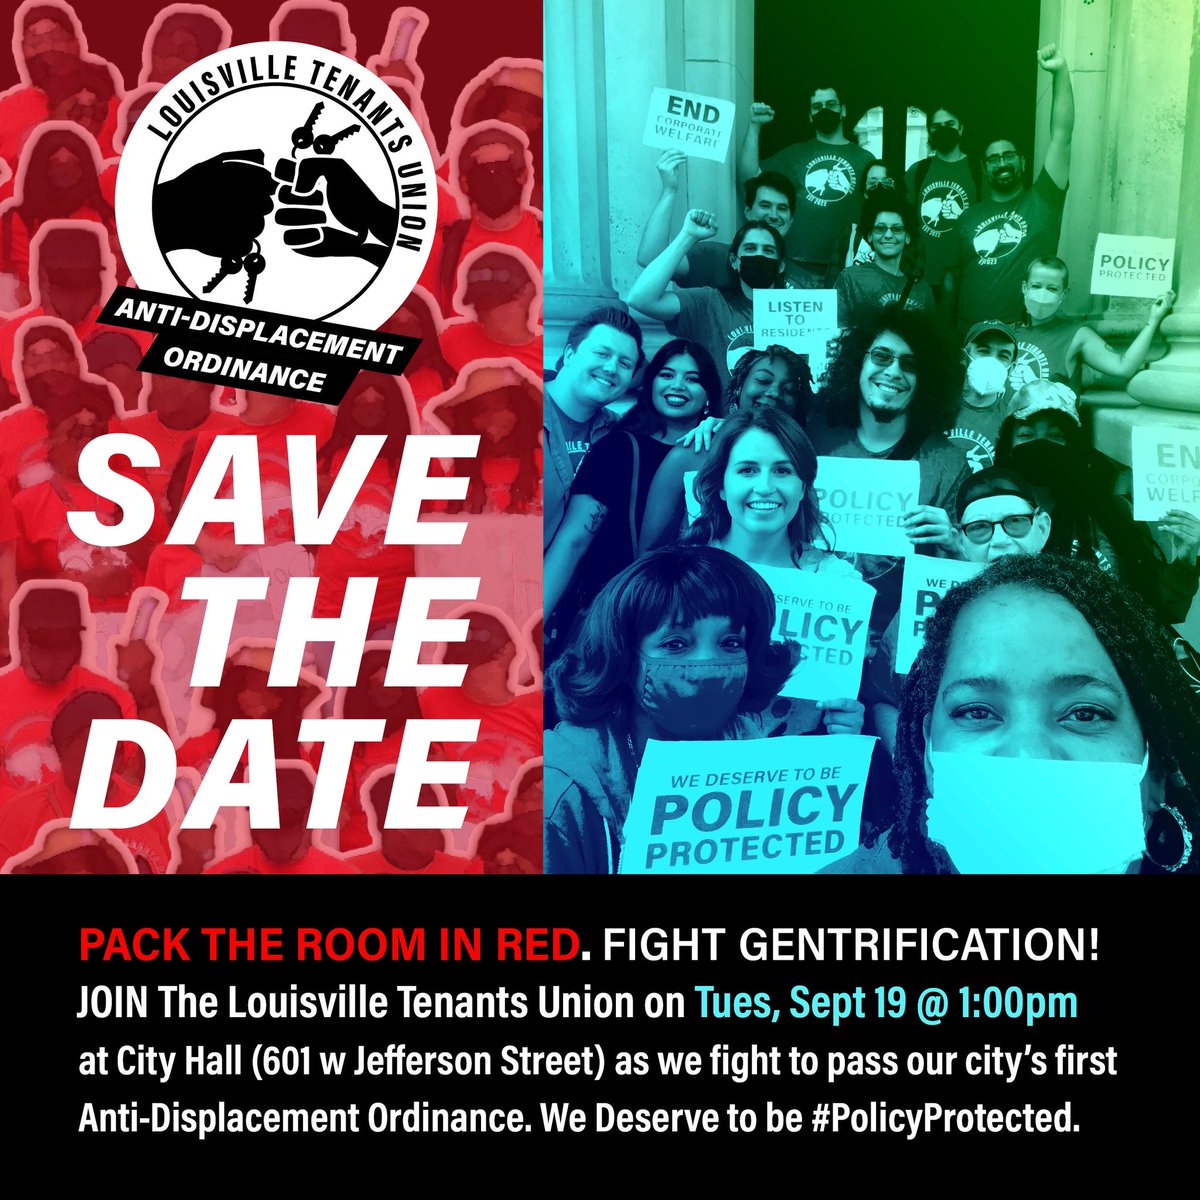 Join us on Tues, Sept 19 at 1:00pm! Stand w/ residents at City Hall and help us pass the city's 1st Anti-Displacement policy. Let's stop #Gentrification in #Louisville. Wear RED in solidarity with residents. #PolicyProtected #ADO #HBNO